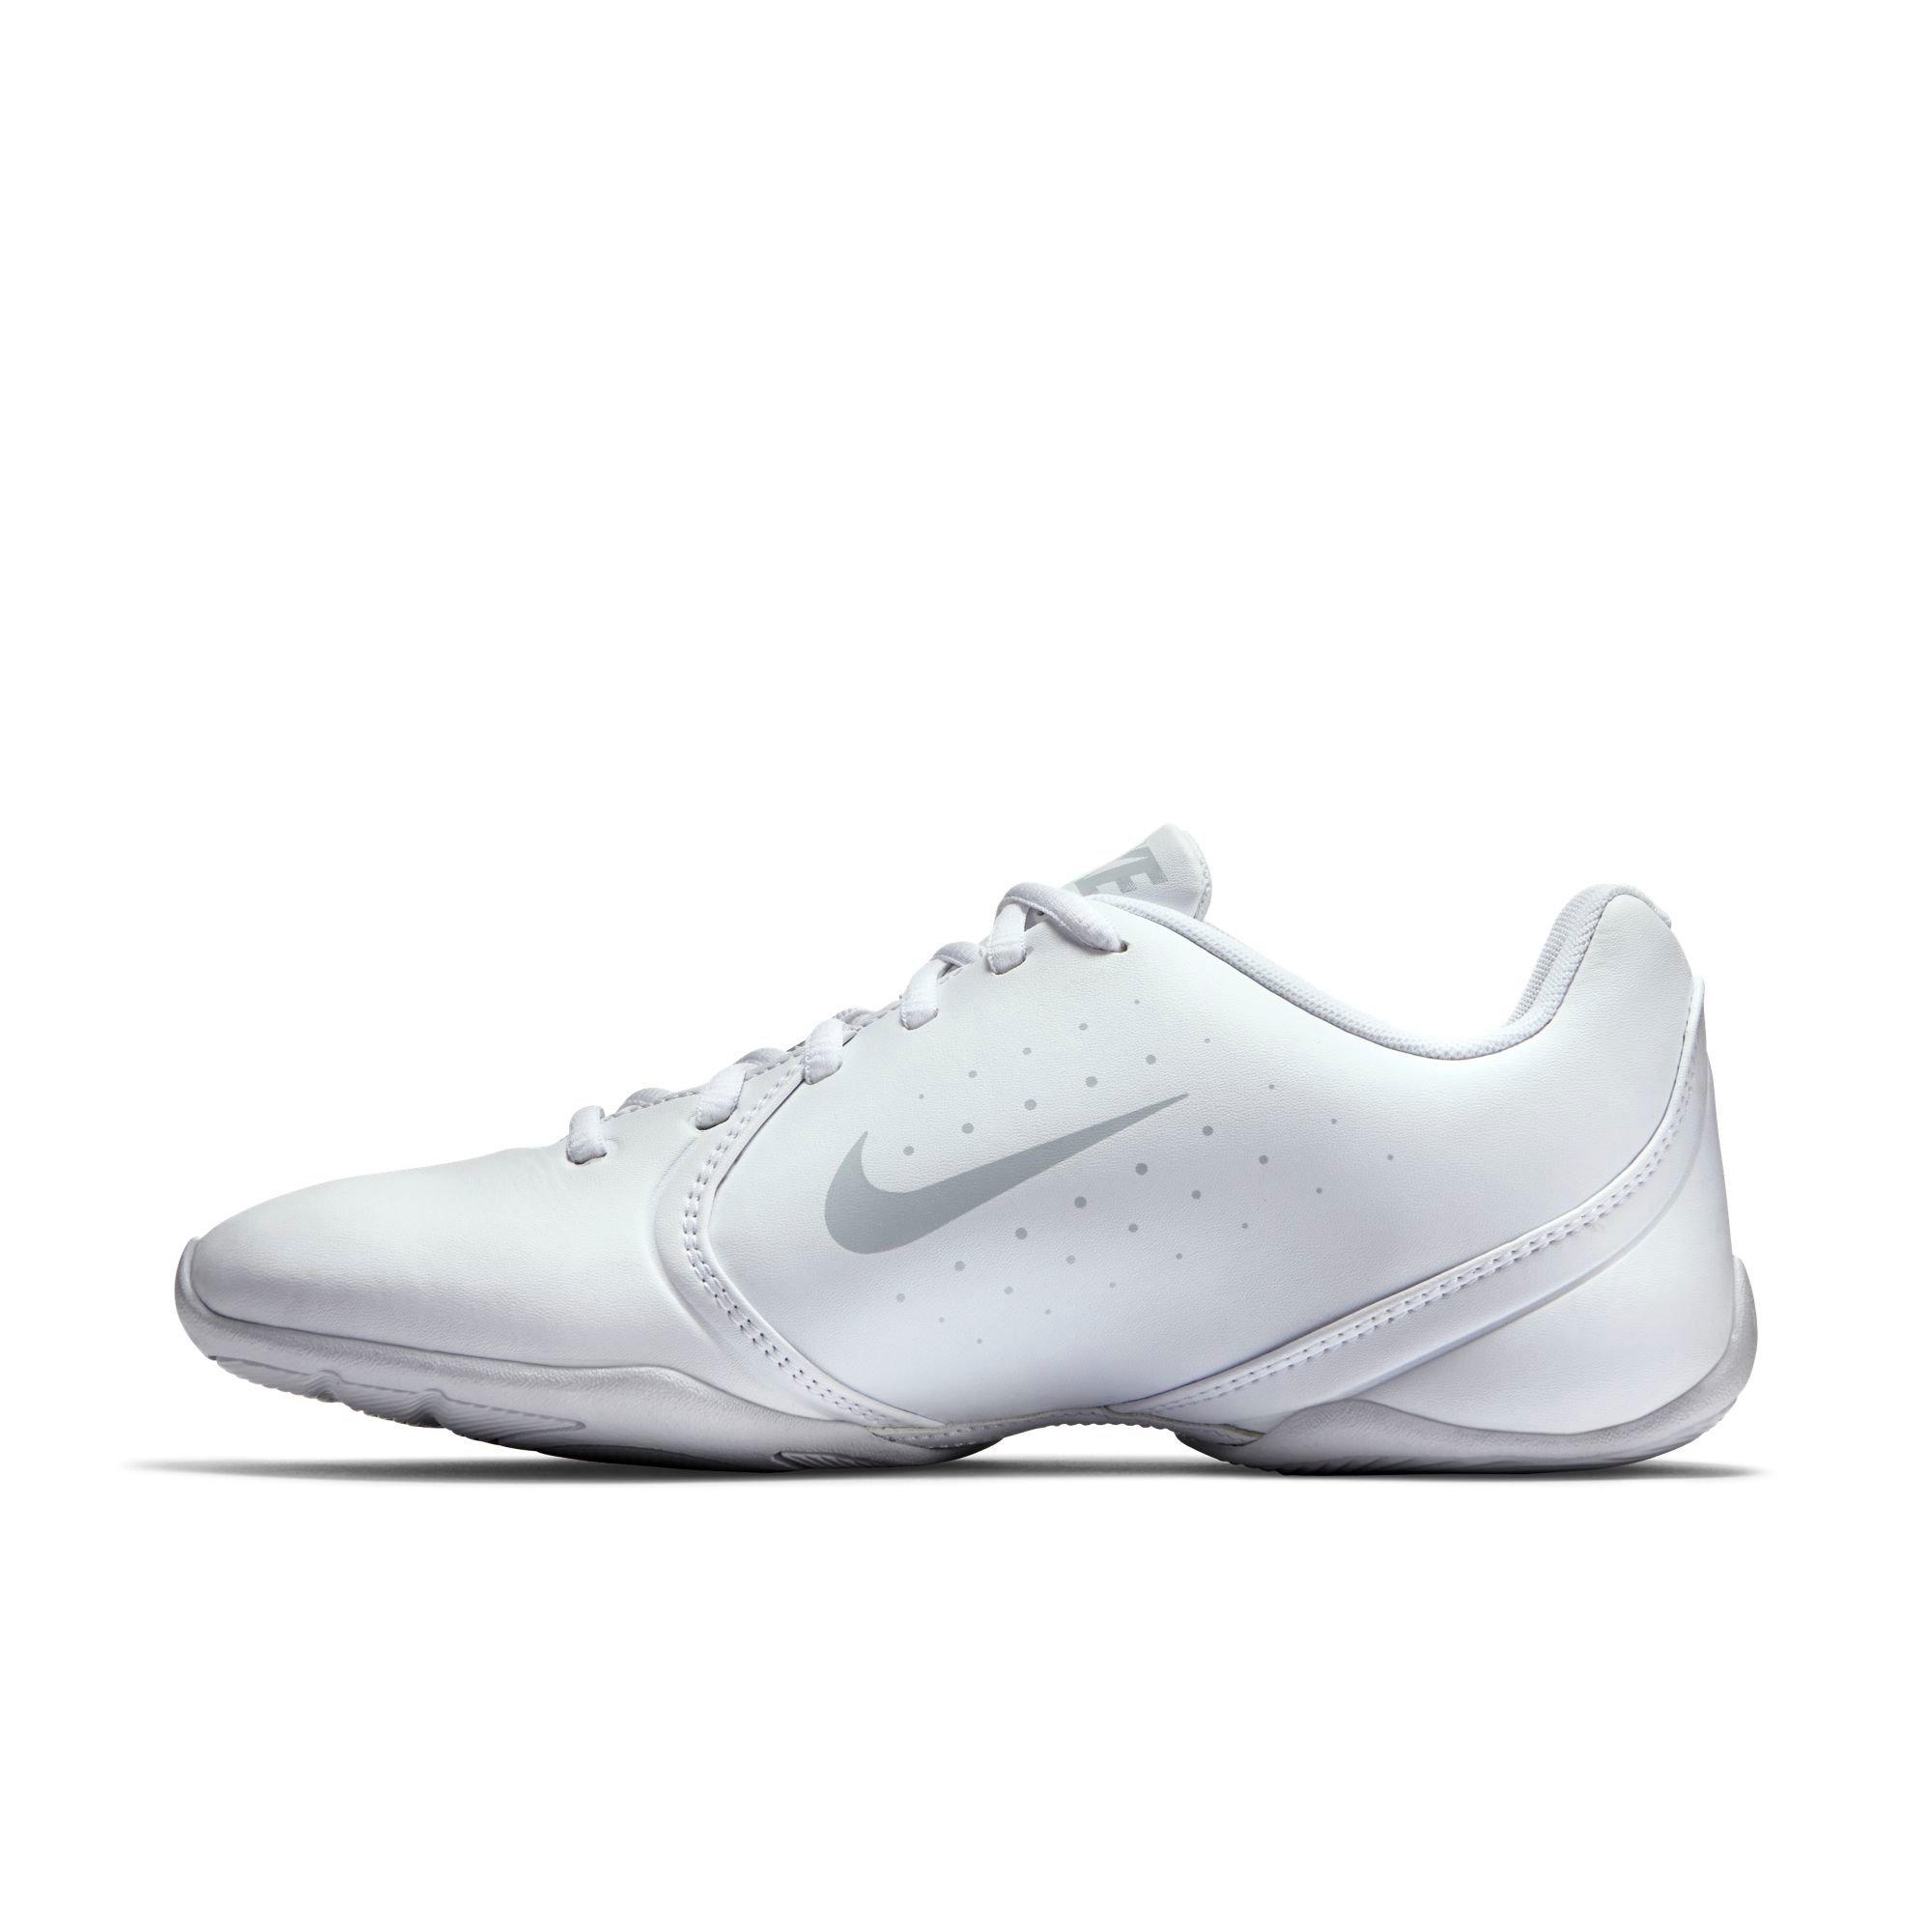 mito nike sideline 3 shoes 